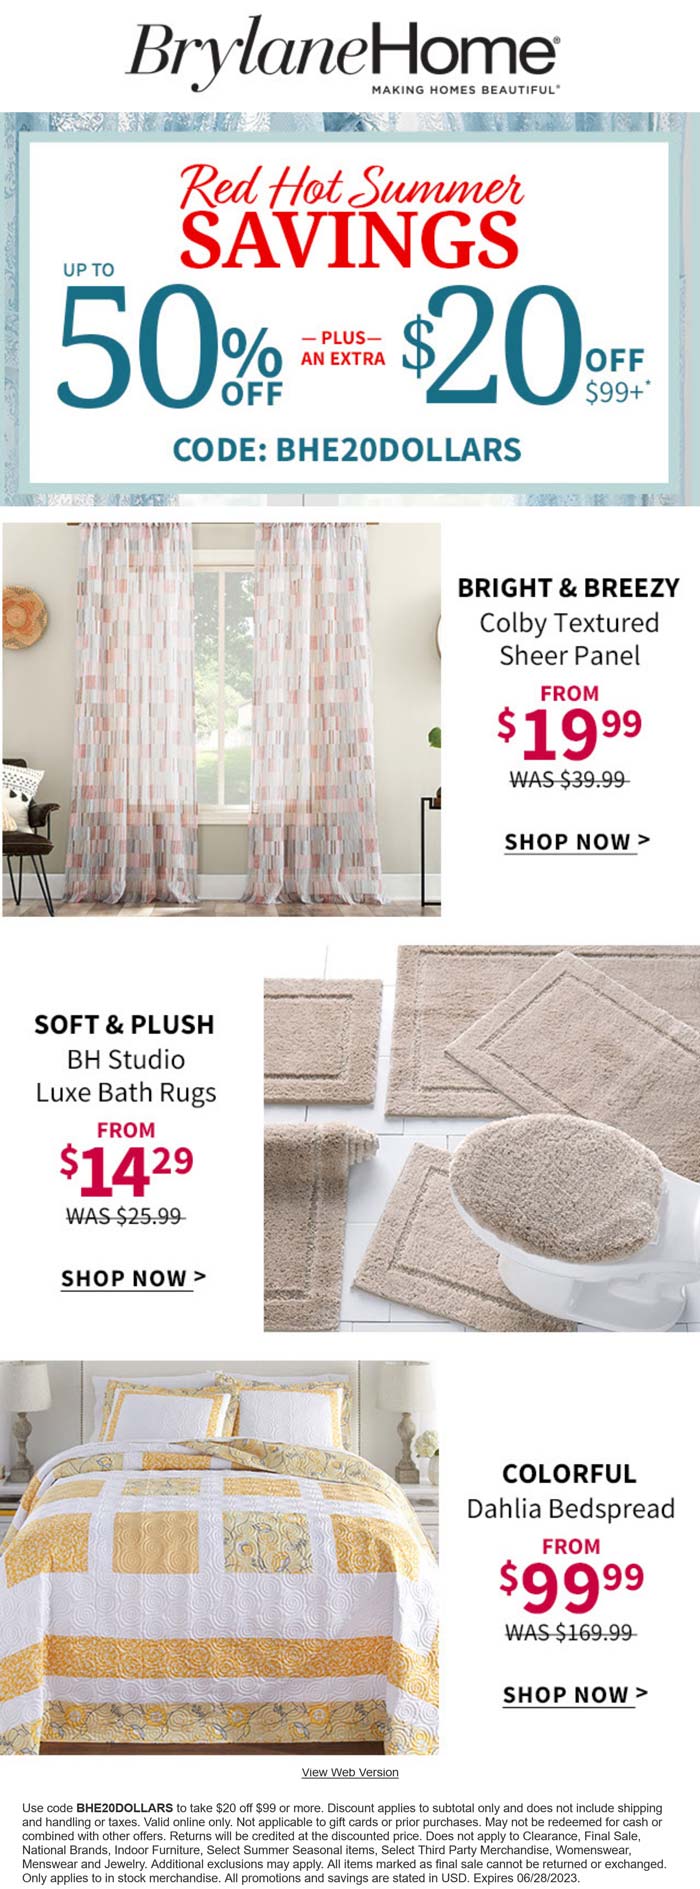 BrylaneHome stores Coupon  $20 off $99 at BrylaneHome via promo code BHE20DOLLARS #brylanehome 